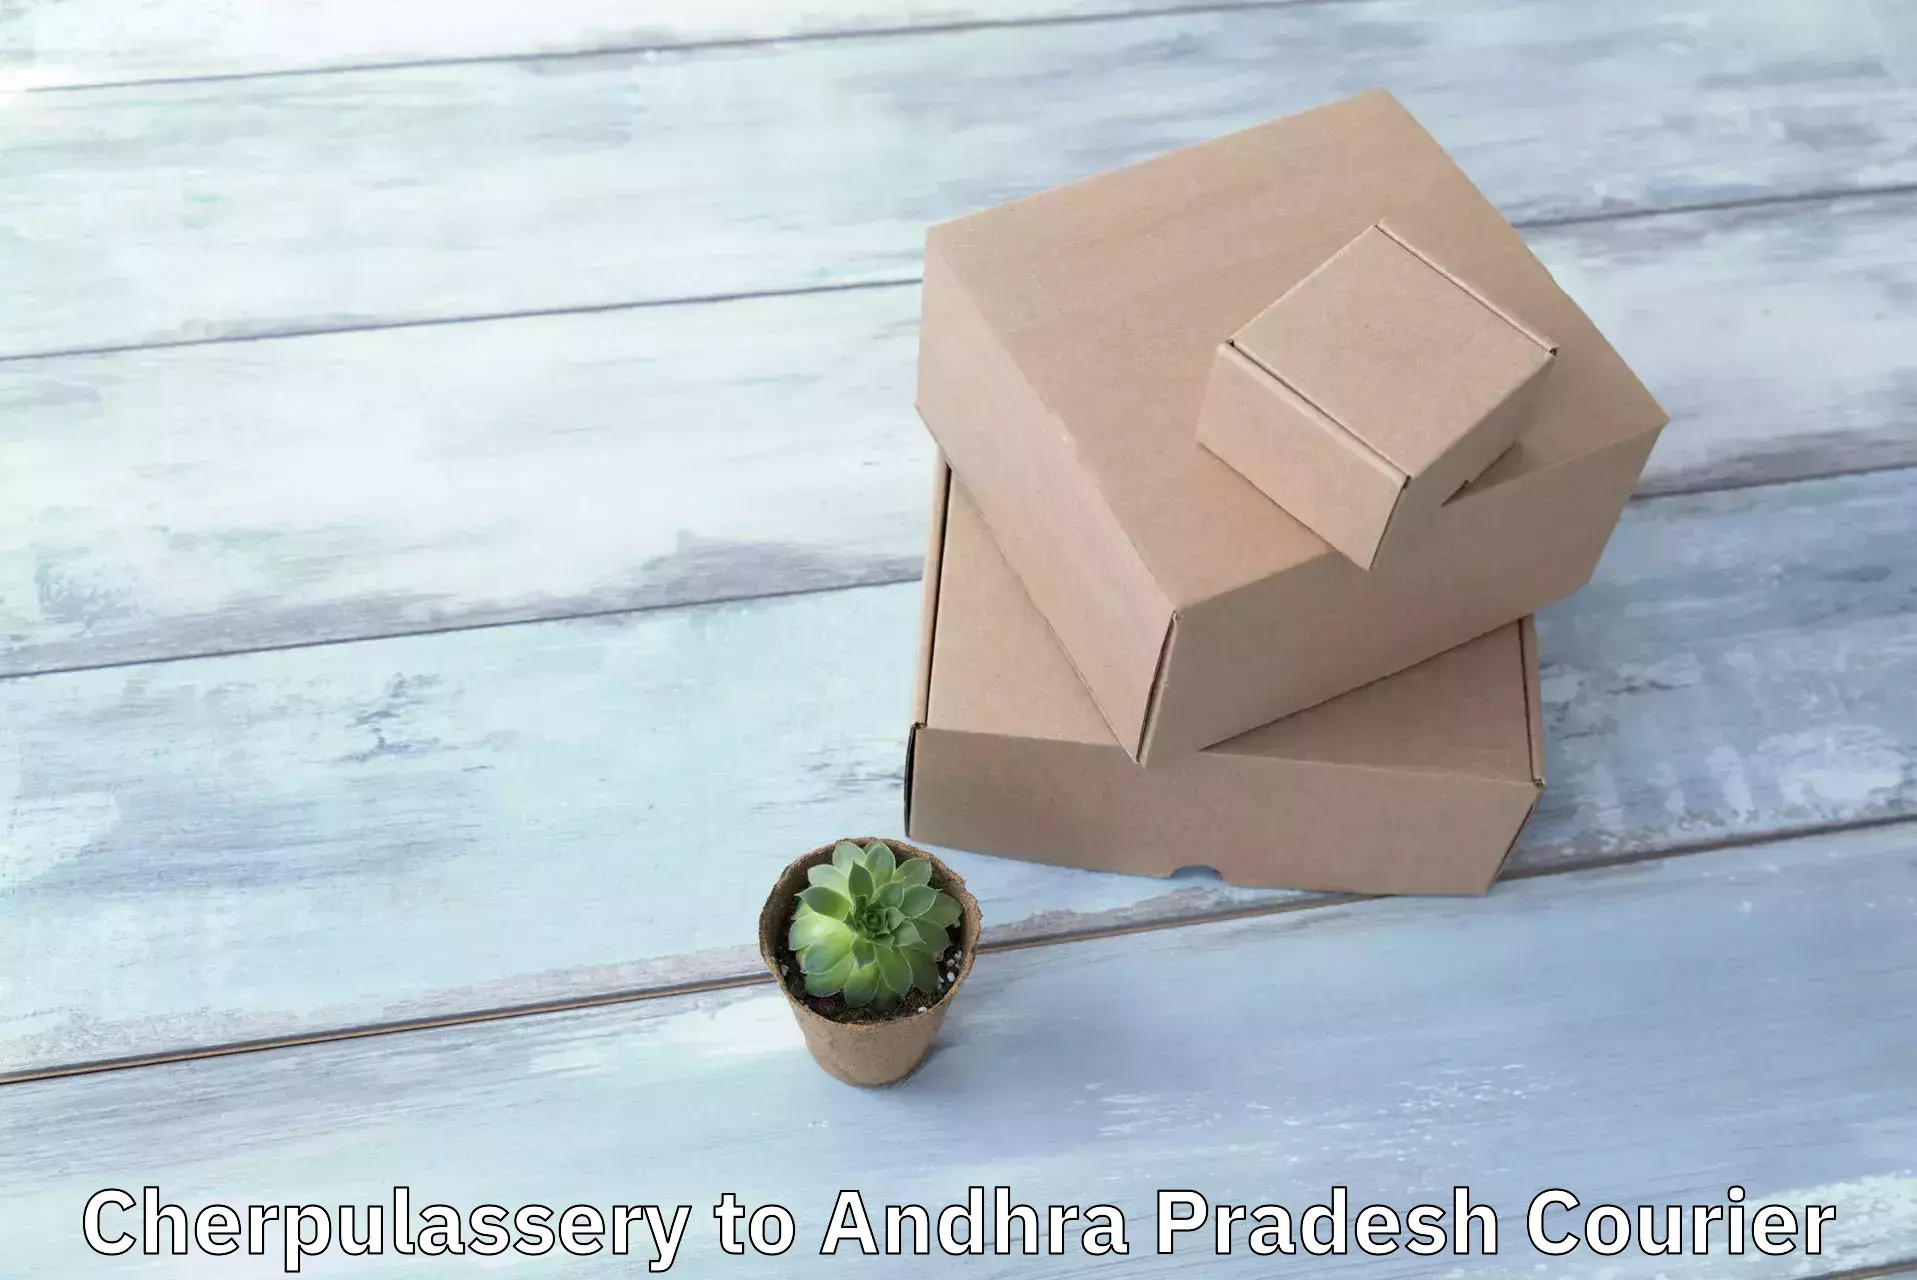 High value parcel delivery in Cherpulassery to Andhra Pradesh